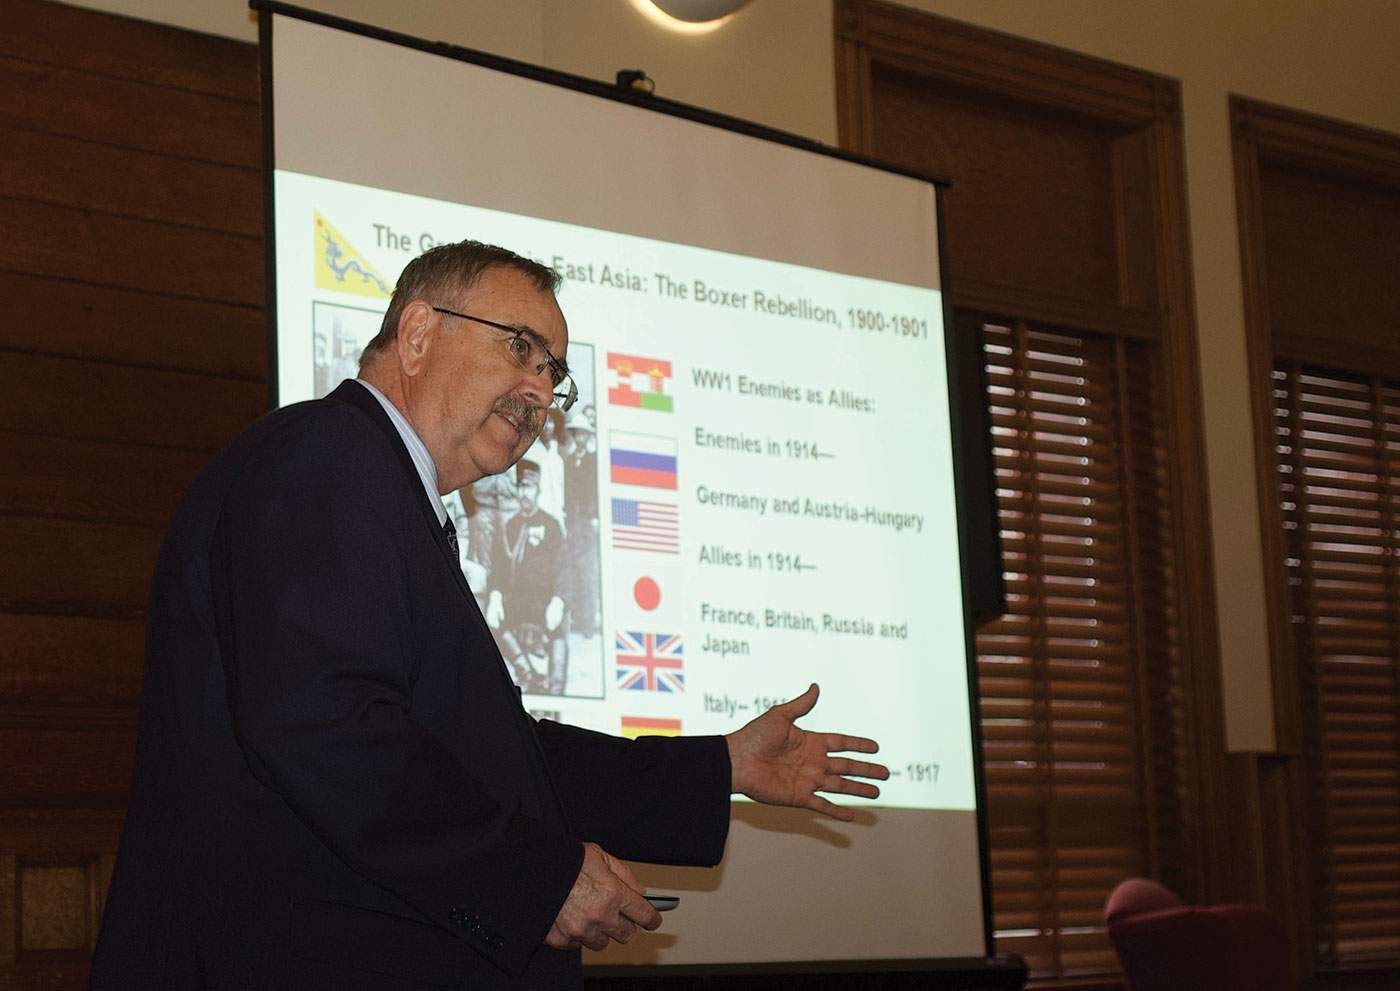 Dr. Joseph G. D. (Geoff) Babb, associate professor of history in the CGSC Department of Military History, presents a lecture on “The Great War in Asia” on April 10, 2019 at the Riverfront Community Center in Leavenworth, Kansas, as part of the General of the Armies John J. Pershing Great War Centennial Series, hosted by CGSC’s Department of Military History and the CGSC Foundation. 